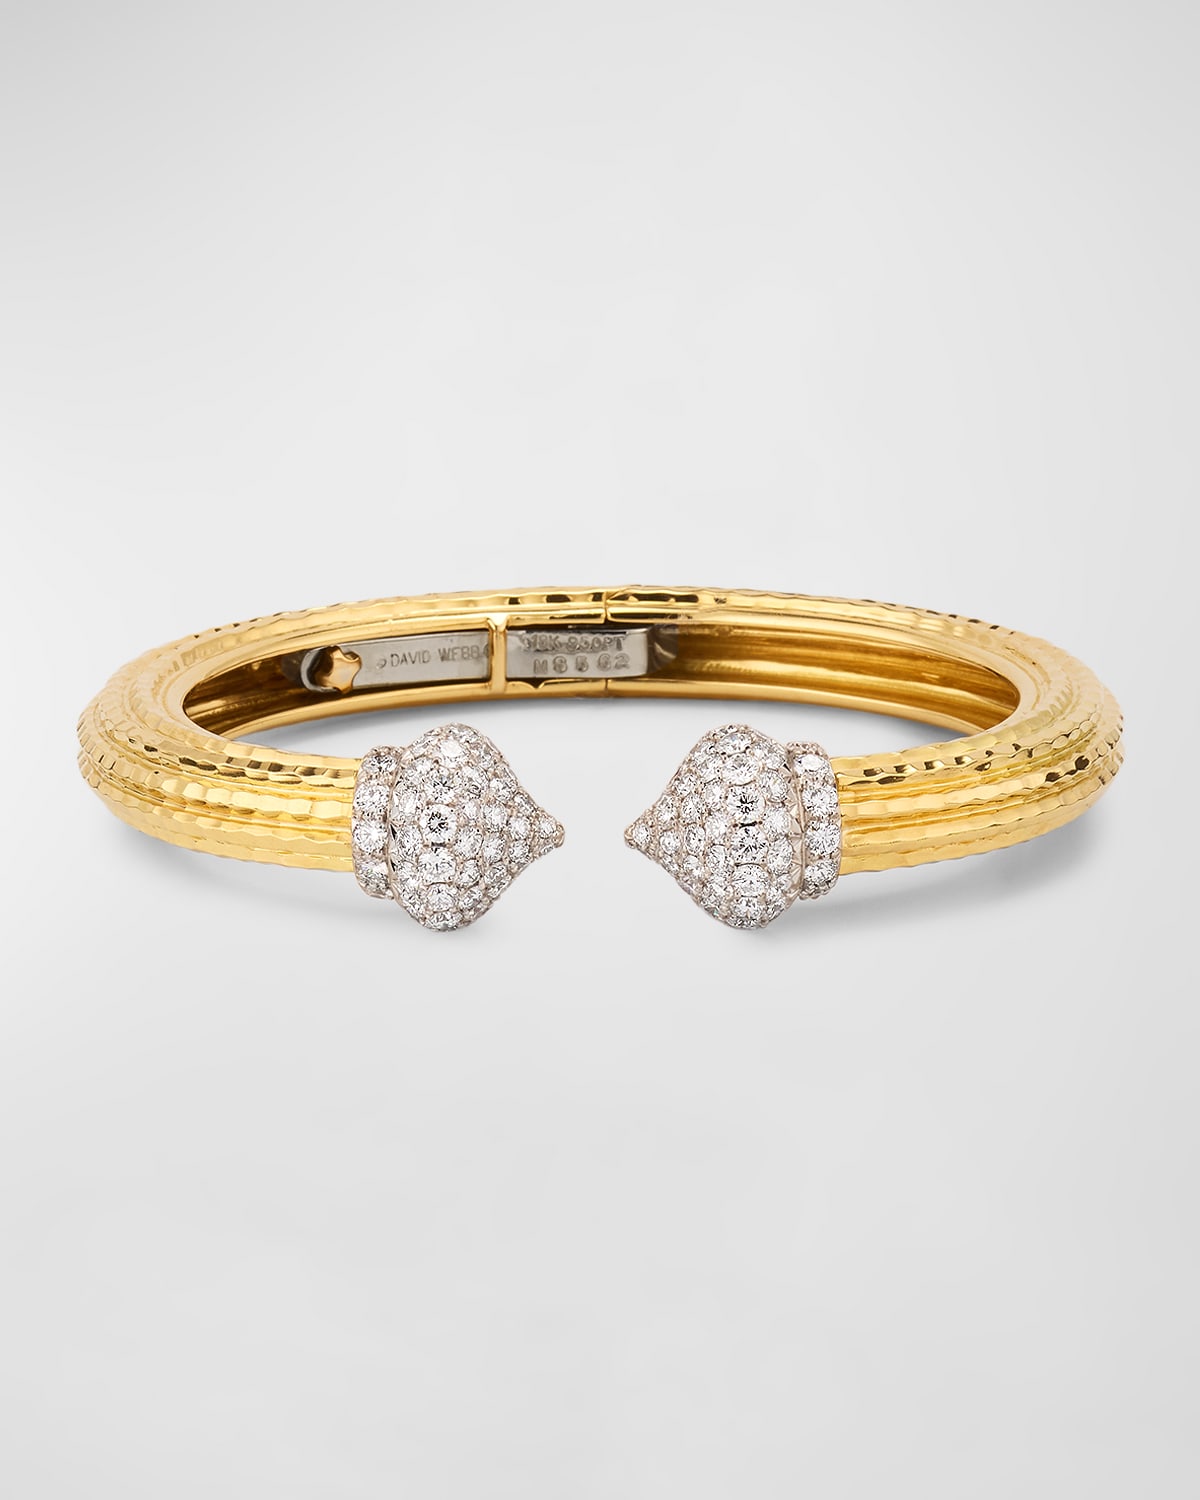 18K Yellow Gold Hammered Bracelet with Diamond Caps